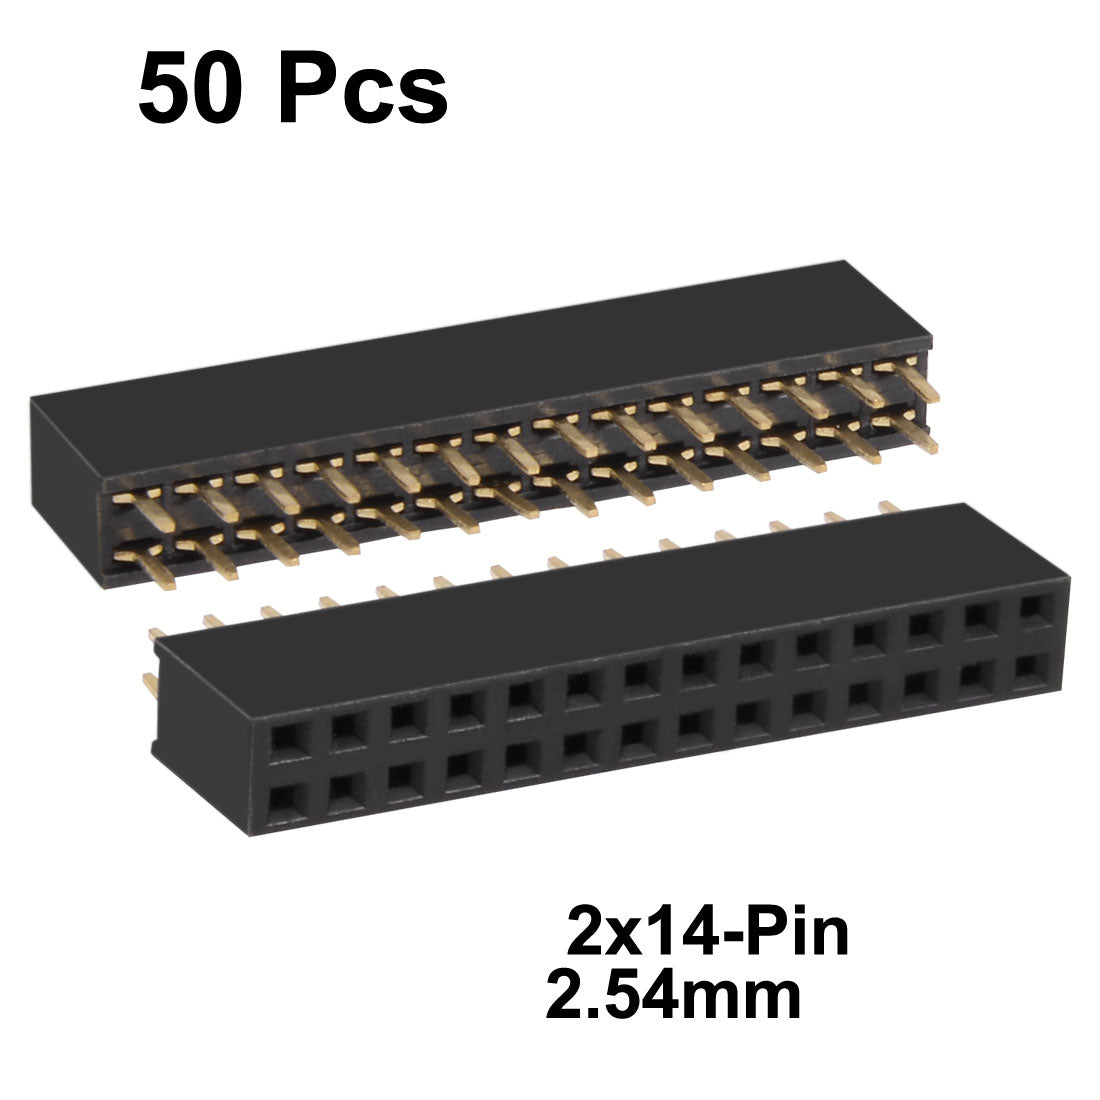 uxcell Uxcell 50Pcs 2.54mm Pitch 2x14-Pin Double Row Straight Connector Female Pin Header Strip PCB Board Socket